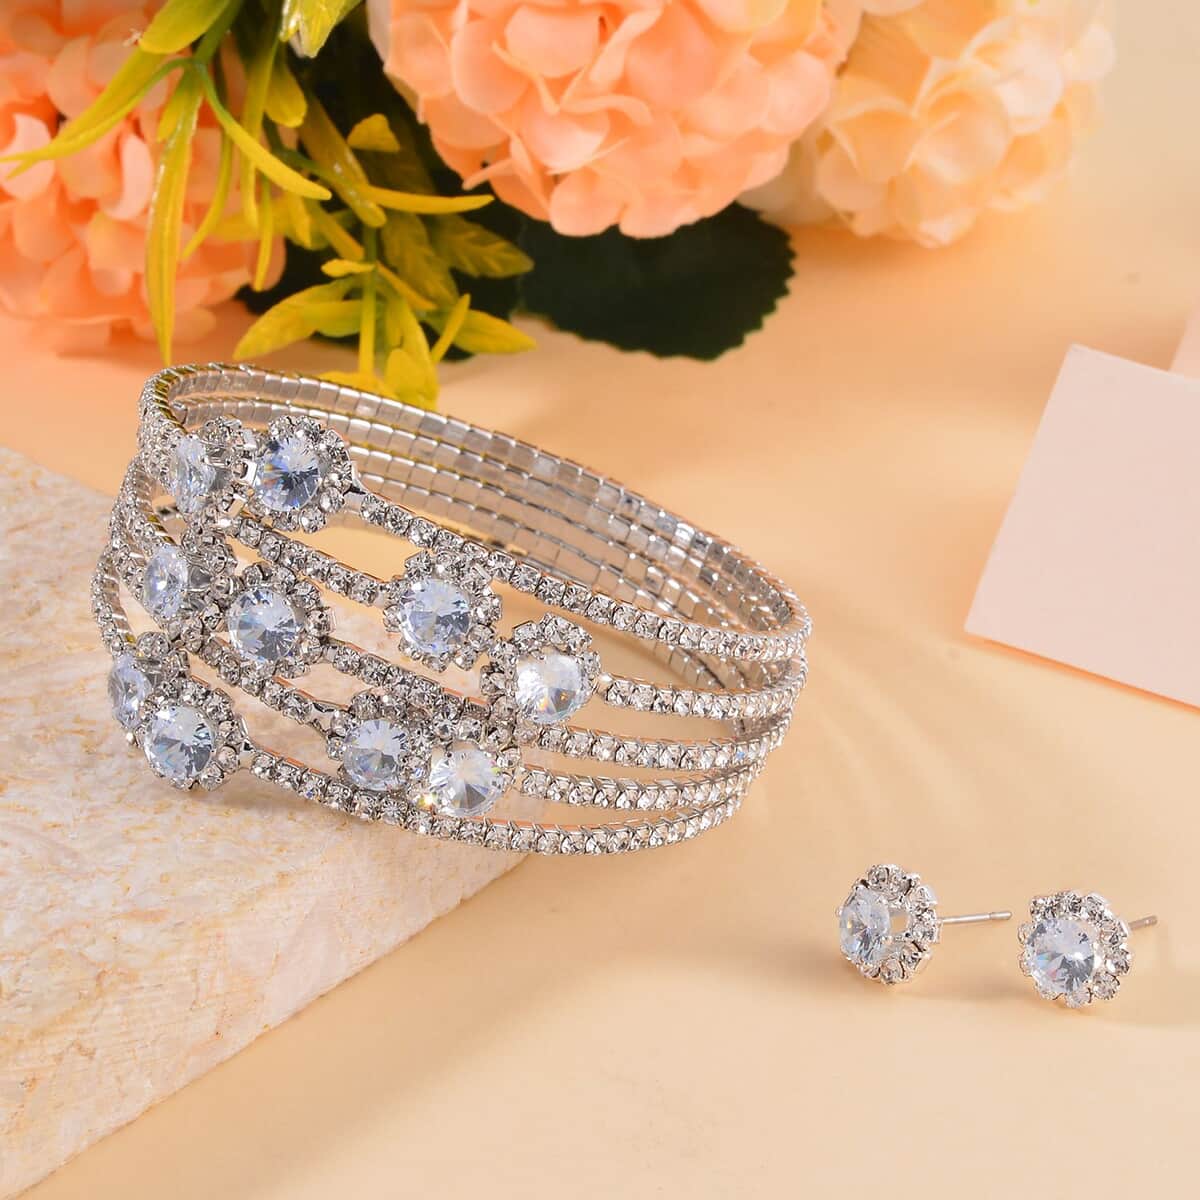 White Color Austrian Crystal Bangle Bracelet (7-7.5 In) and Earrings in Silvertone image number 1